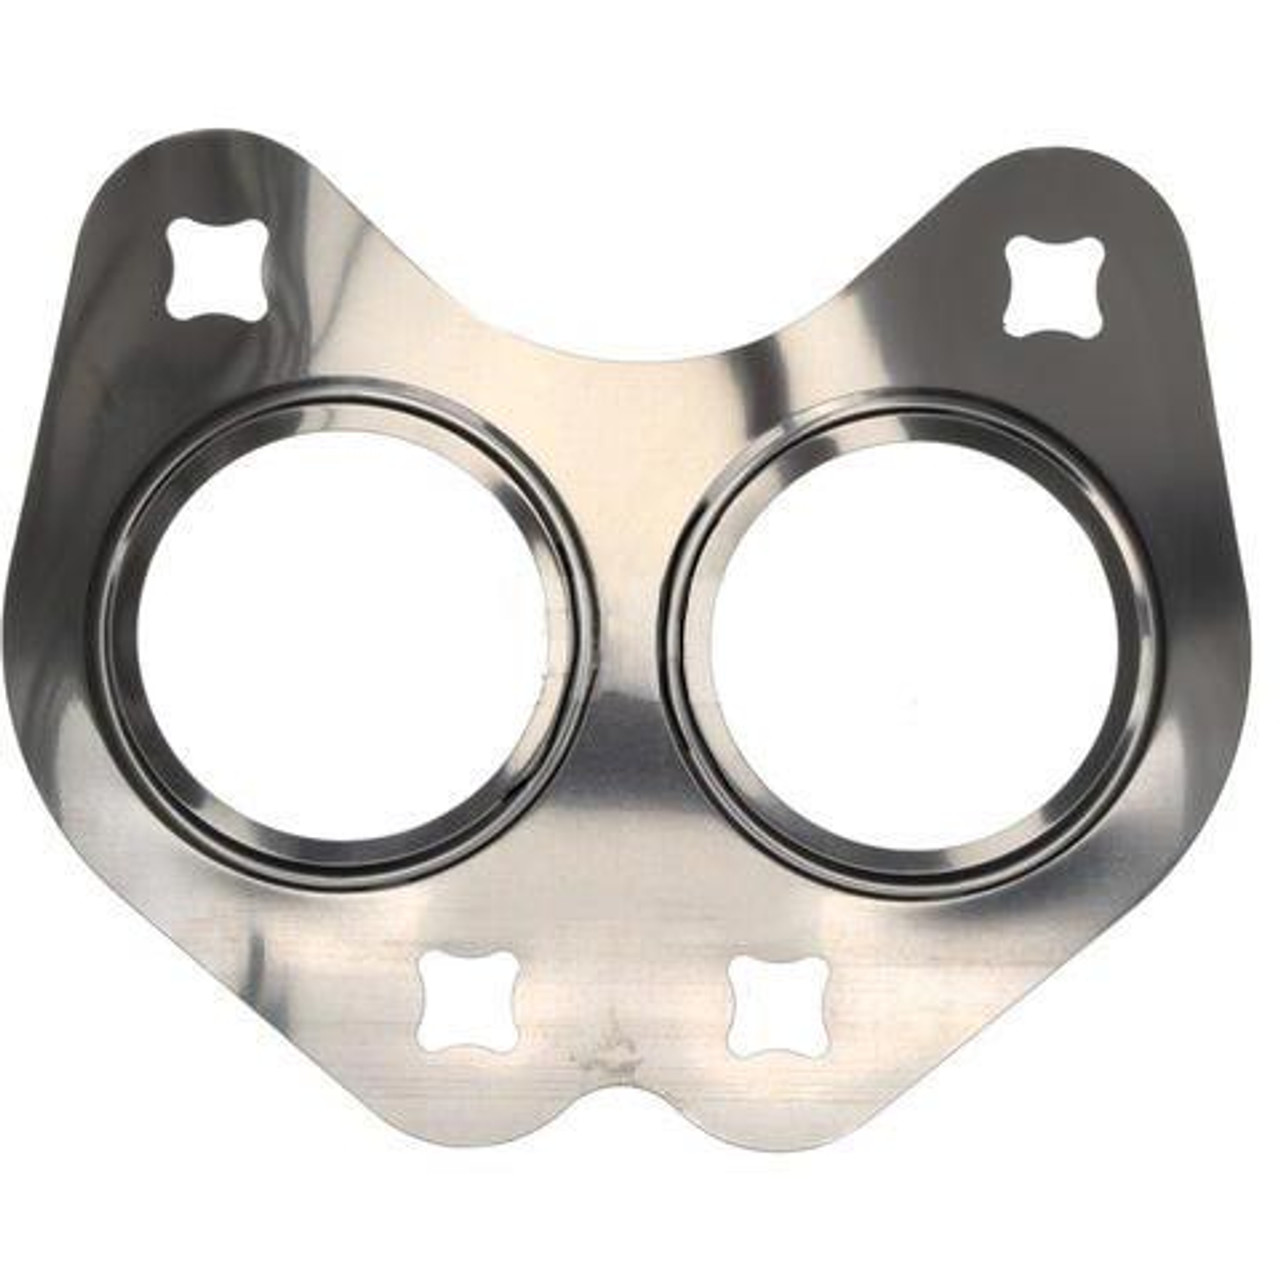 Mahle EGR Bypass Valve Gasket 2007.5 to 2018 6.7L Cummins (MCIG32810)-Main View